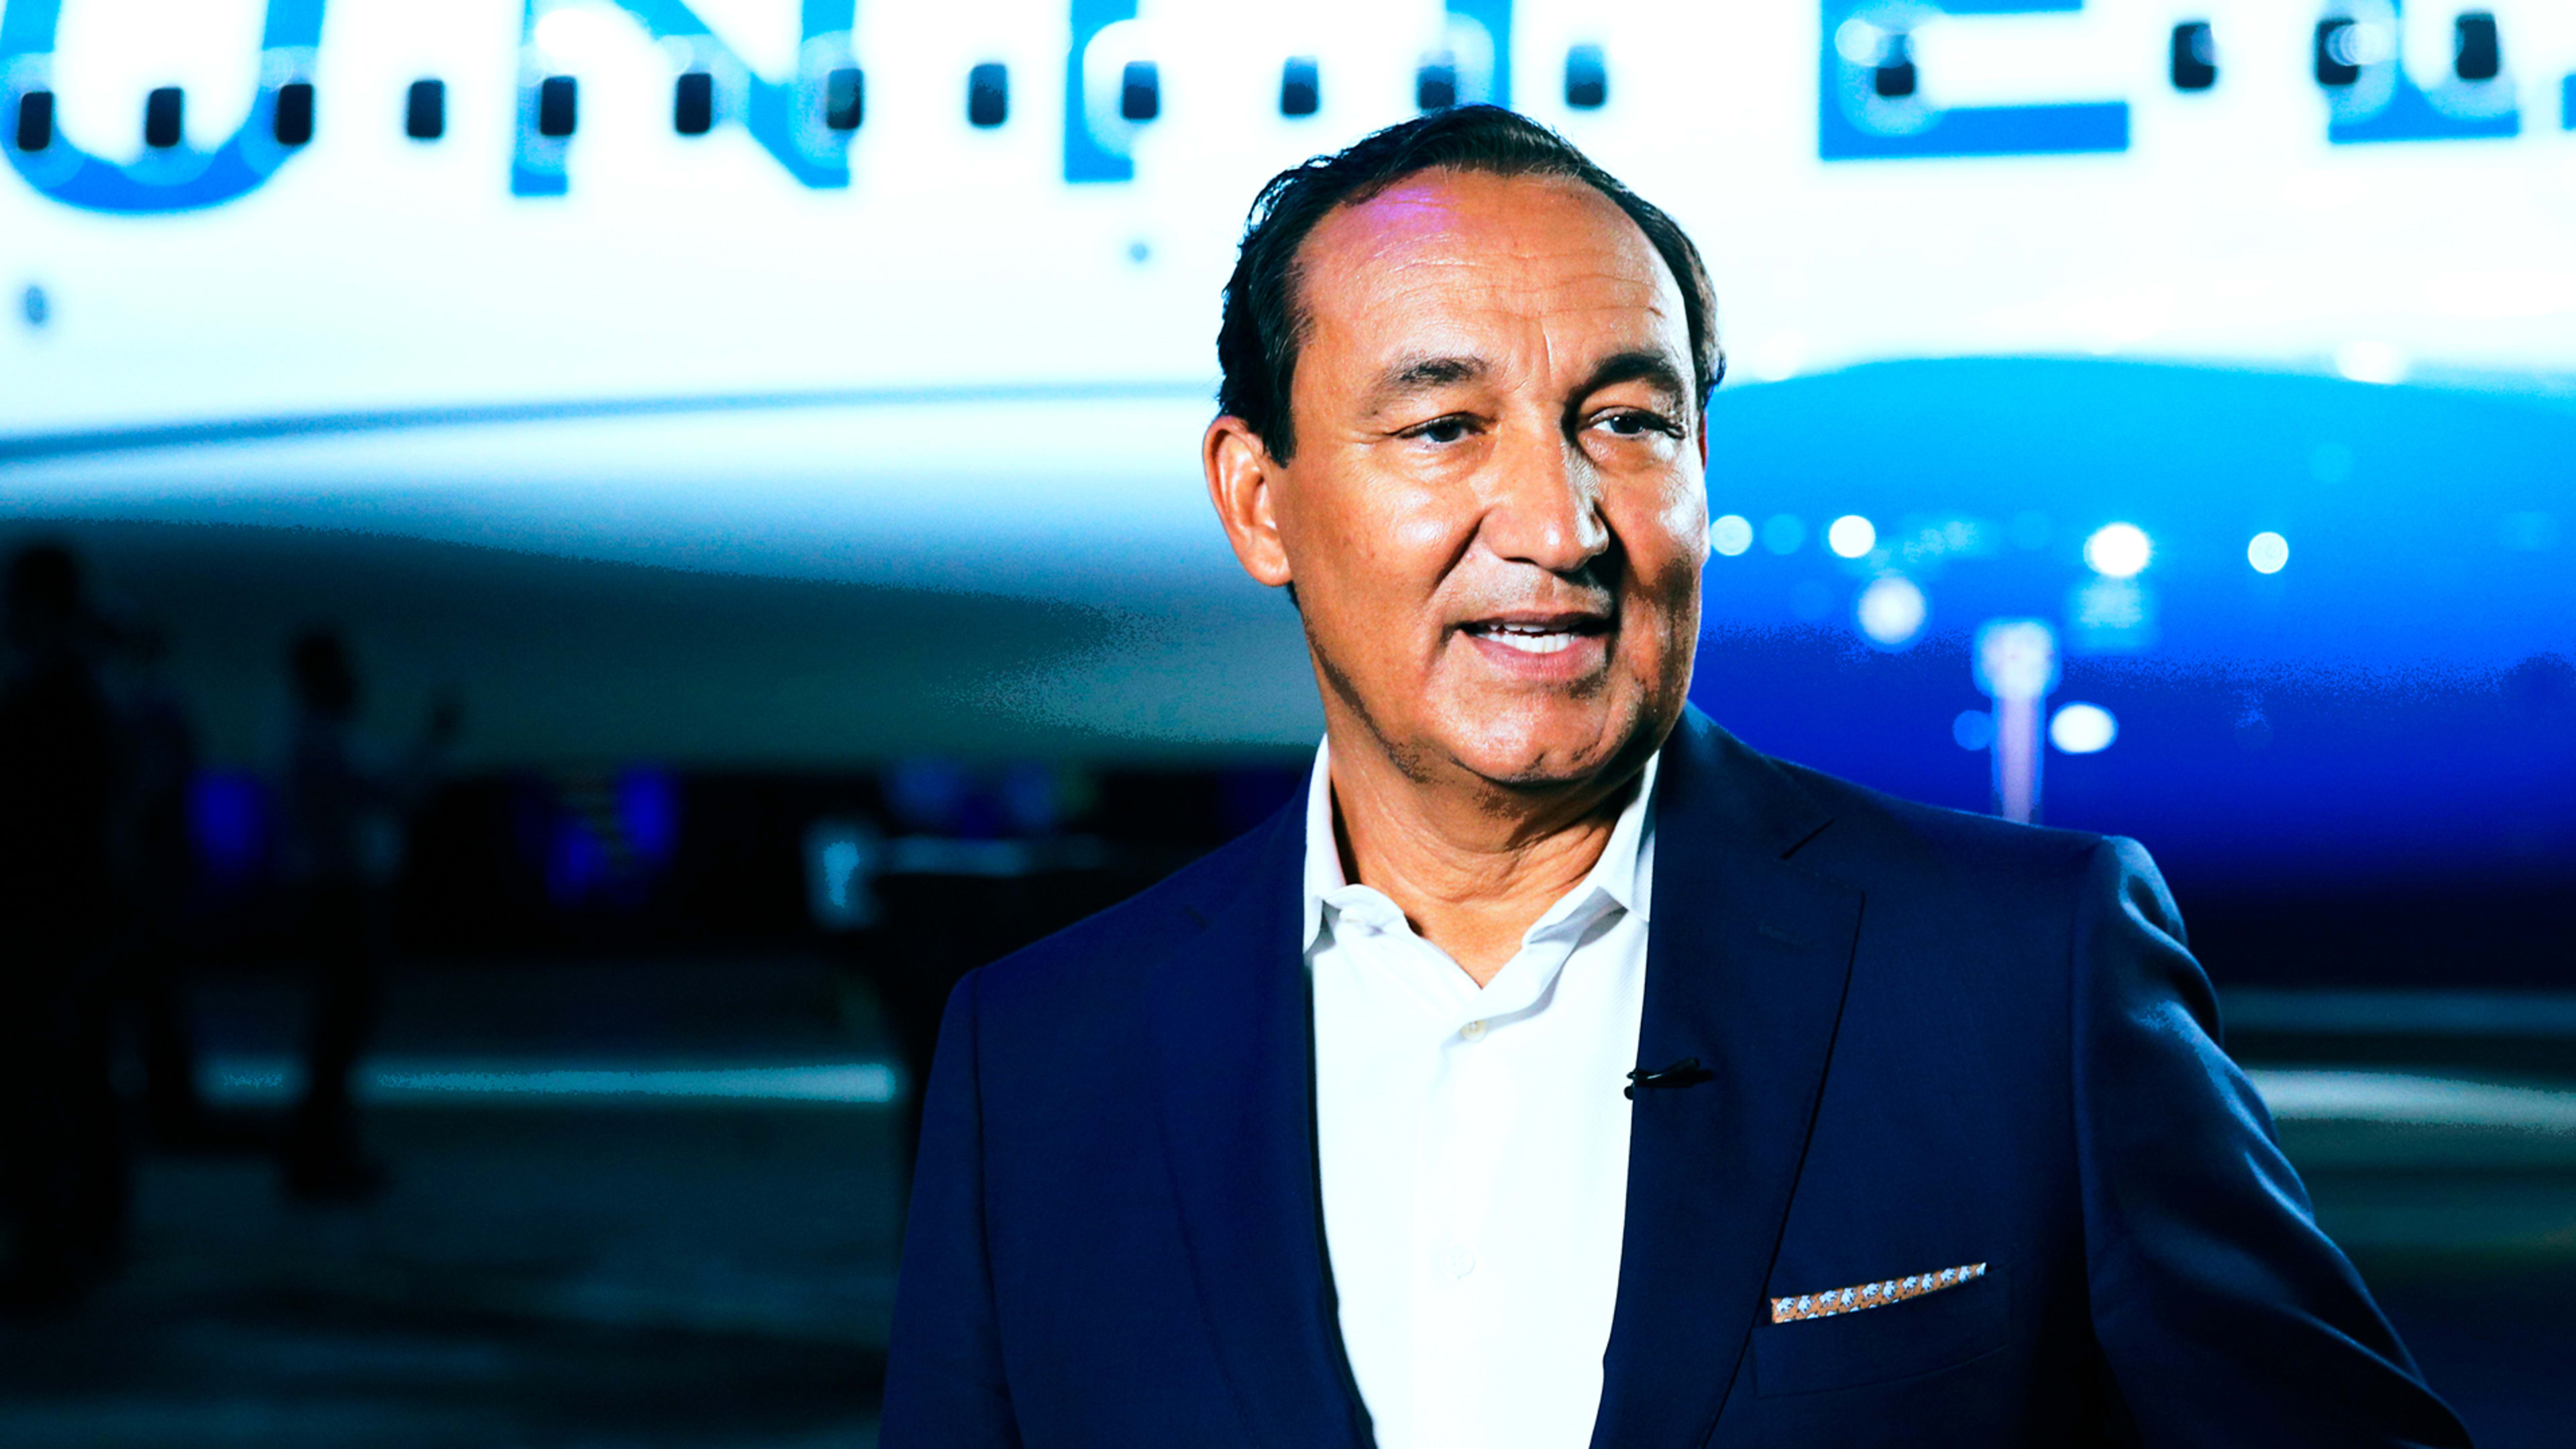 Why apologizing takes a toll on workers, according to United Airlines’ Oscar Munoz